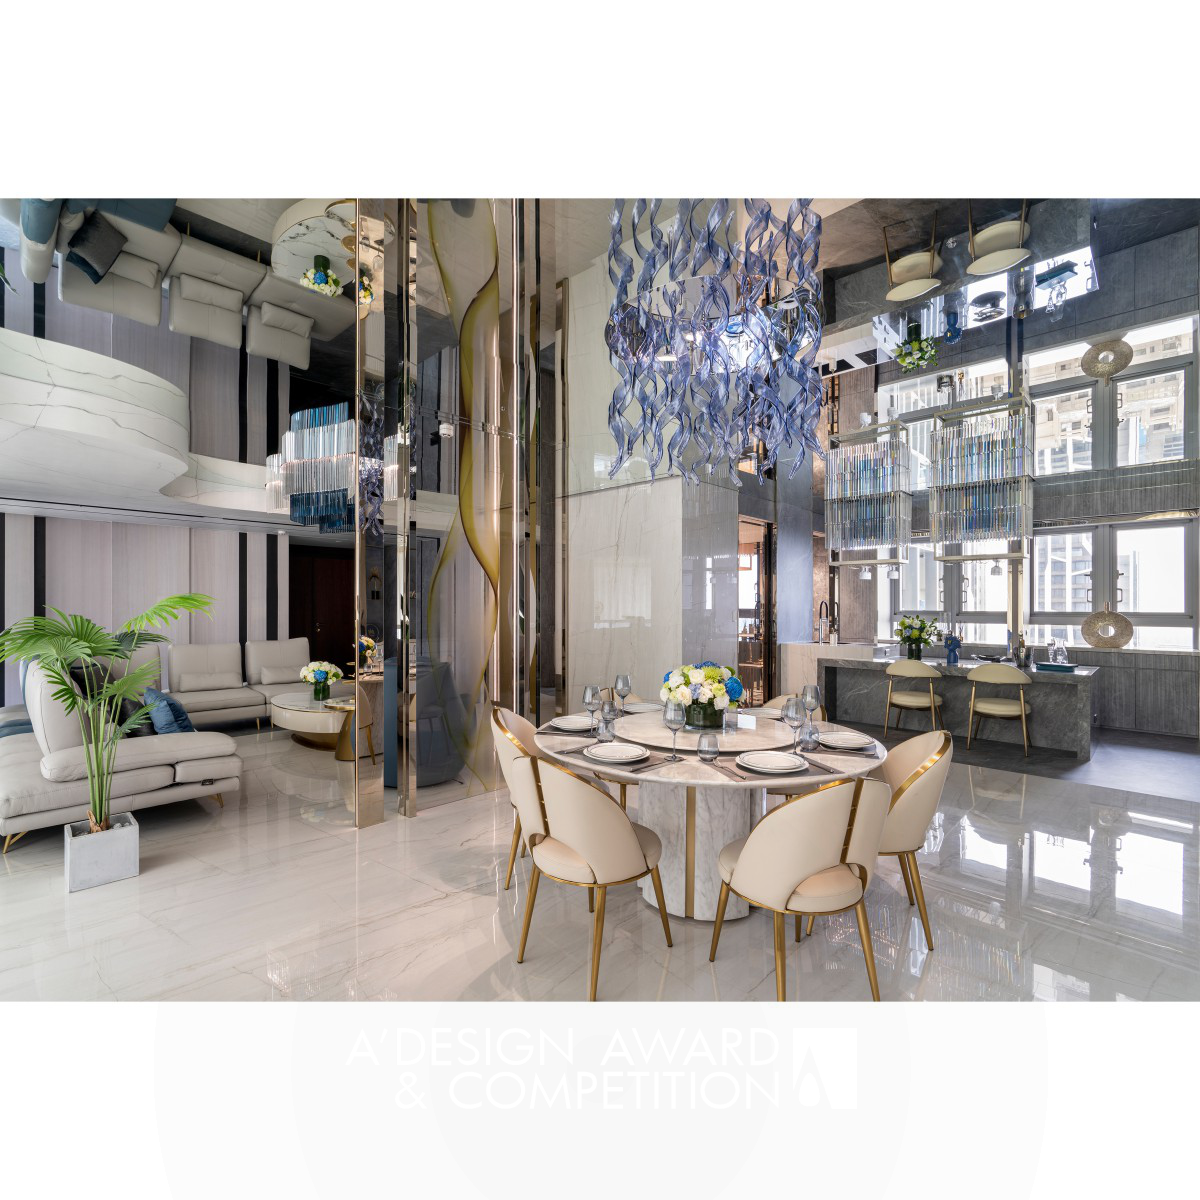 Lo Fang Ming wins Iron at the prestigious A' Interior Space, Retail and Exhibition Design Award with Cote d&#039;Azur Residential Apartment.